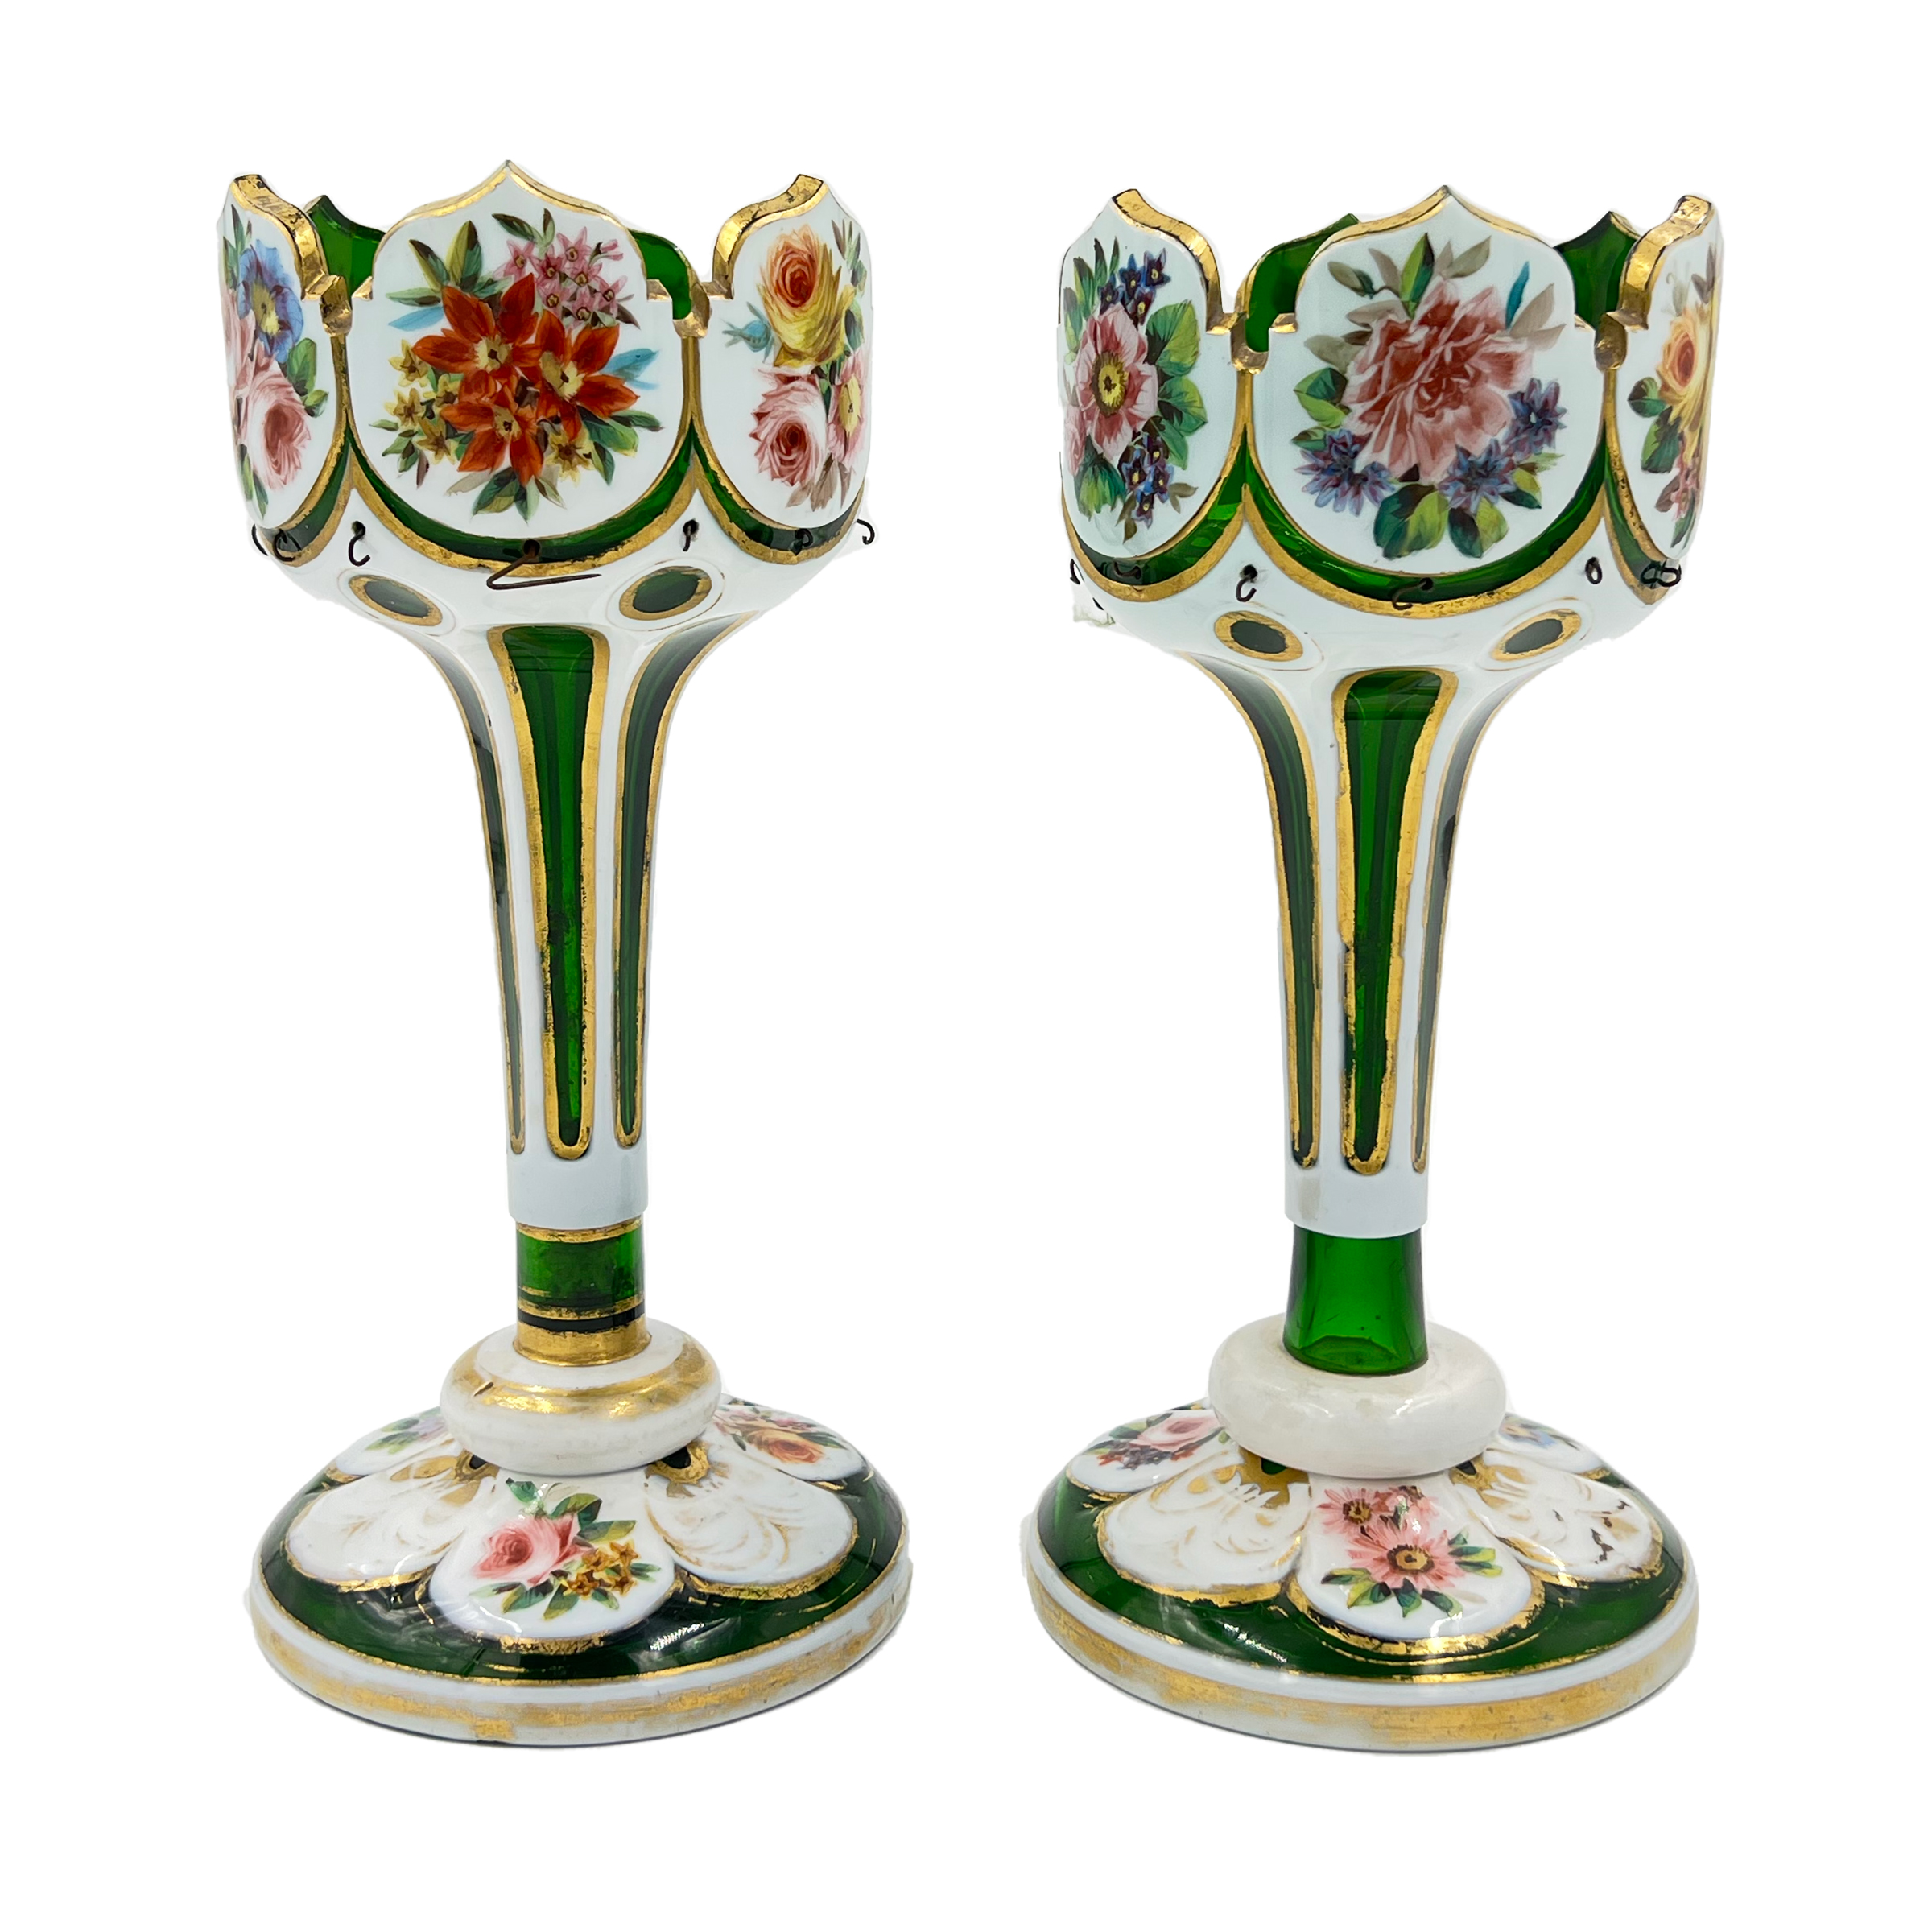 PAIR OF HAND-PAINTED BOHEMIAN GLASS LUSTRES